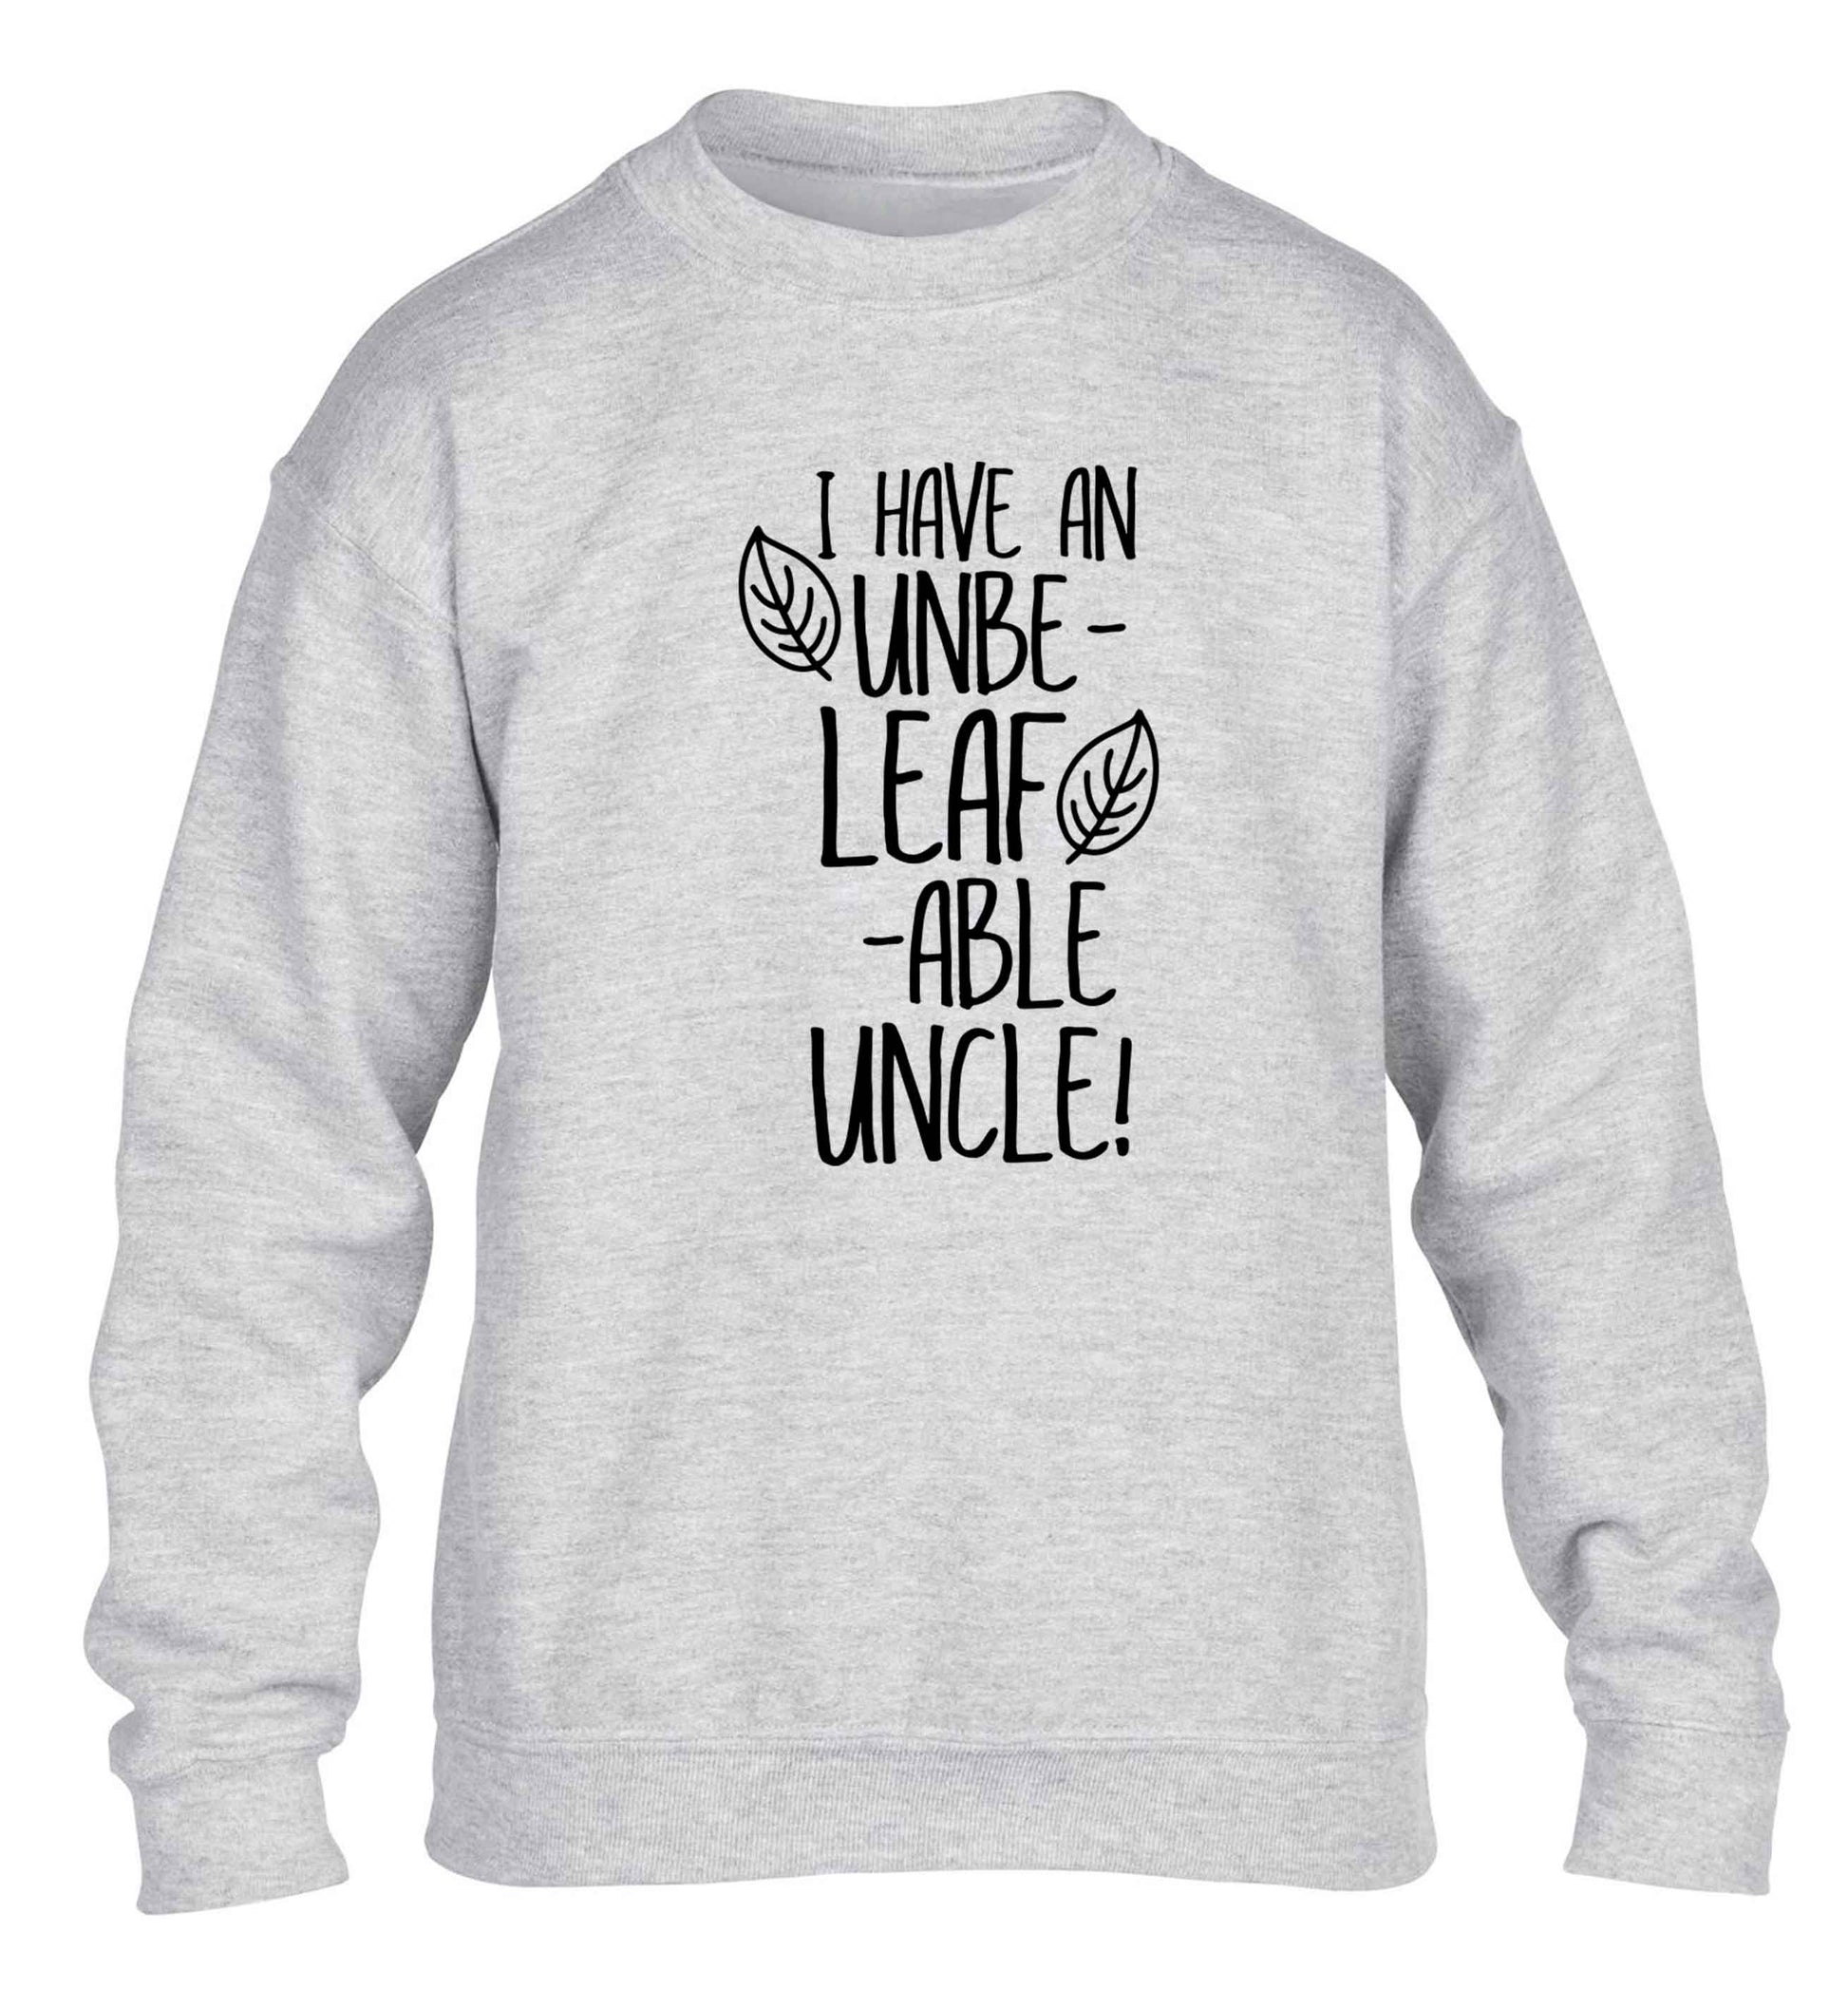 I have an unbe-leaf-able uncle children's grey sweater 12-13 Years